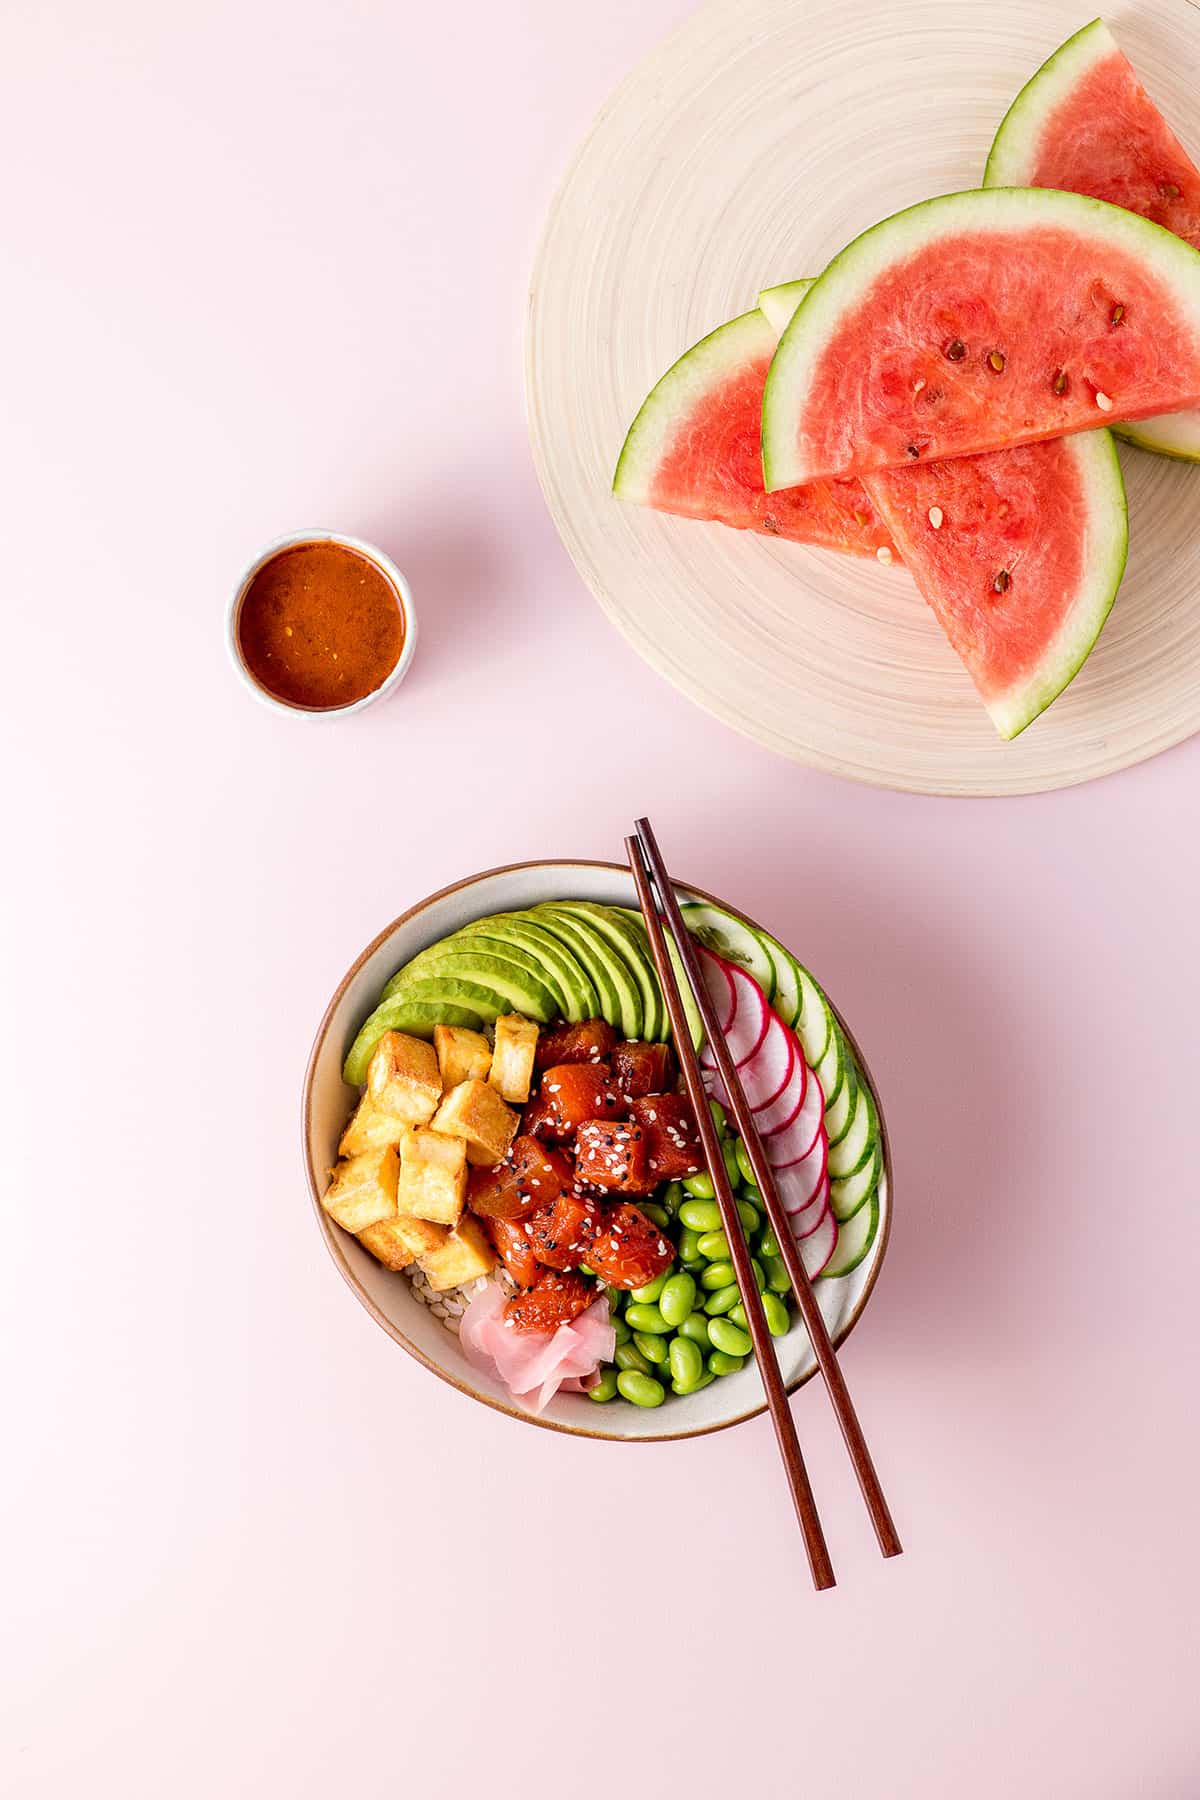 Overhead shot of a watermelon poke bowl (a bowl with edamame beans, sliced radish, cucumber and avocado, fried tofu and marinated watermelon visible), sliced watermelon on a chopping board, and a small dish of watermelon poke marinade. 